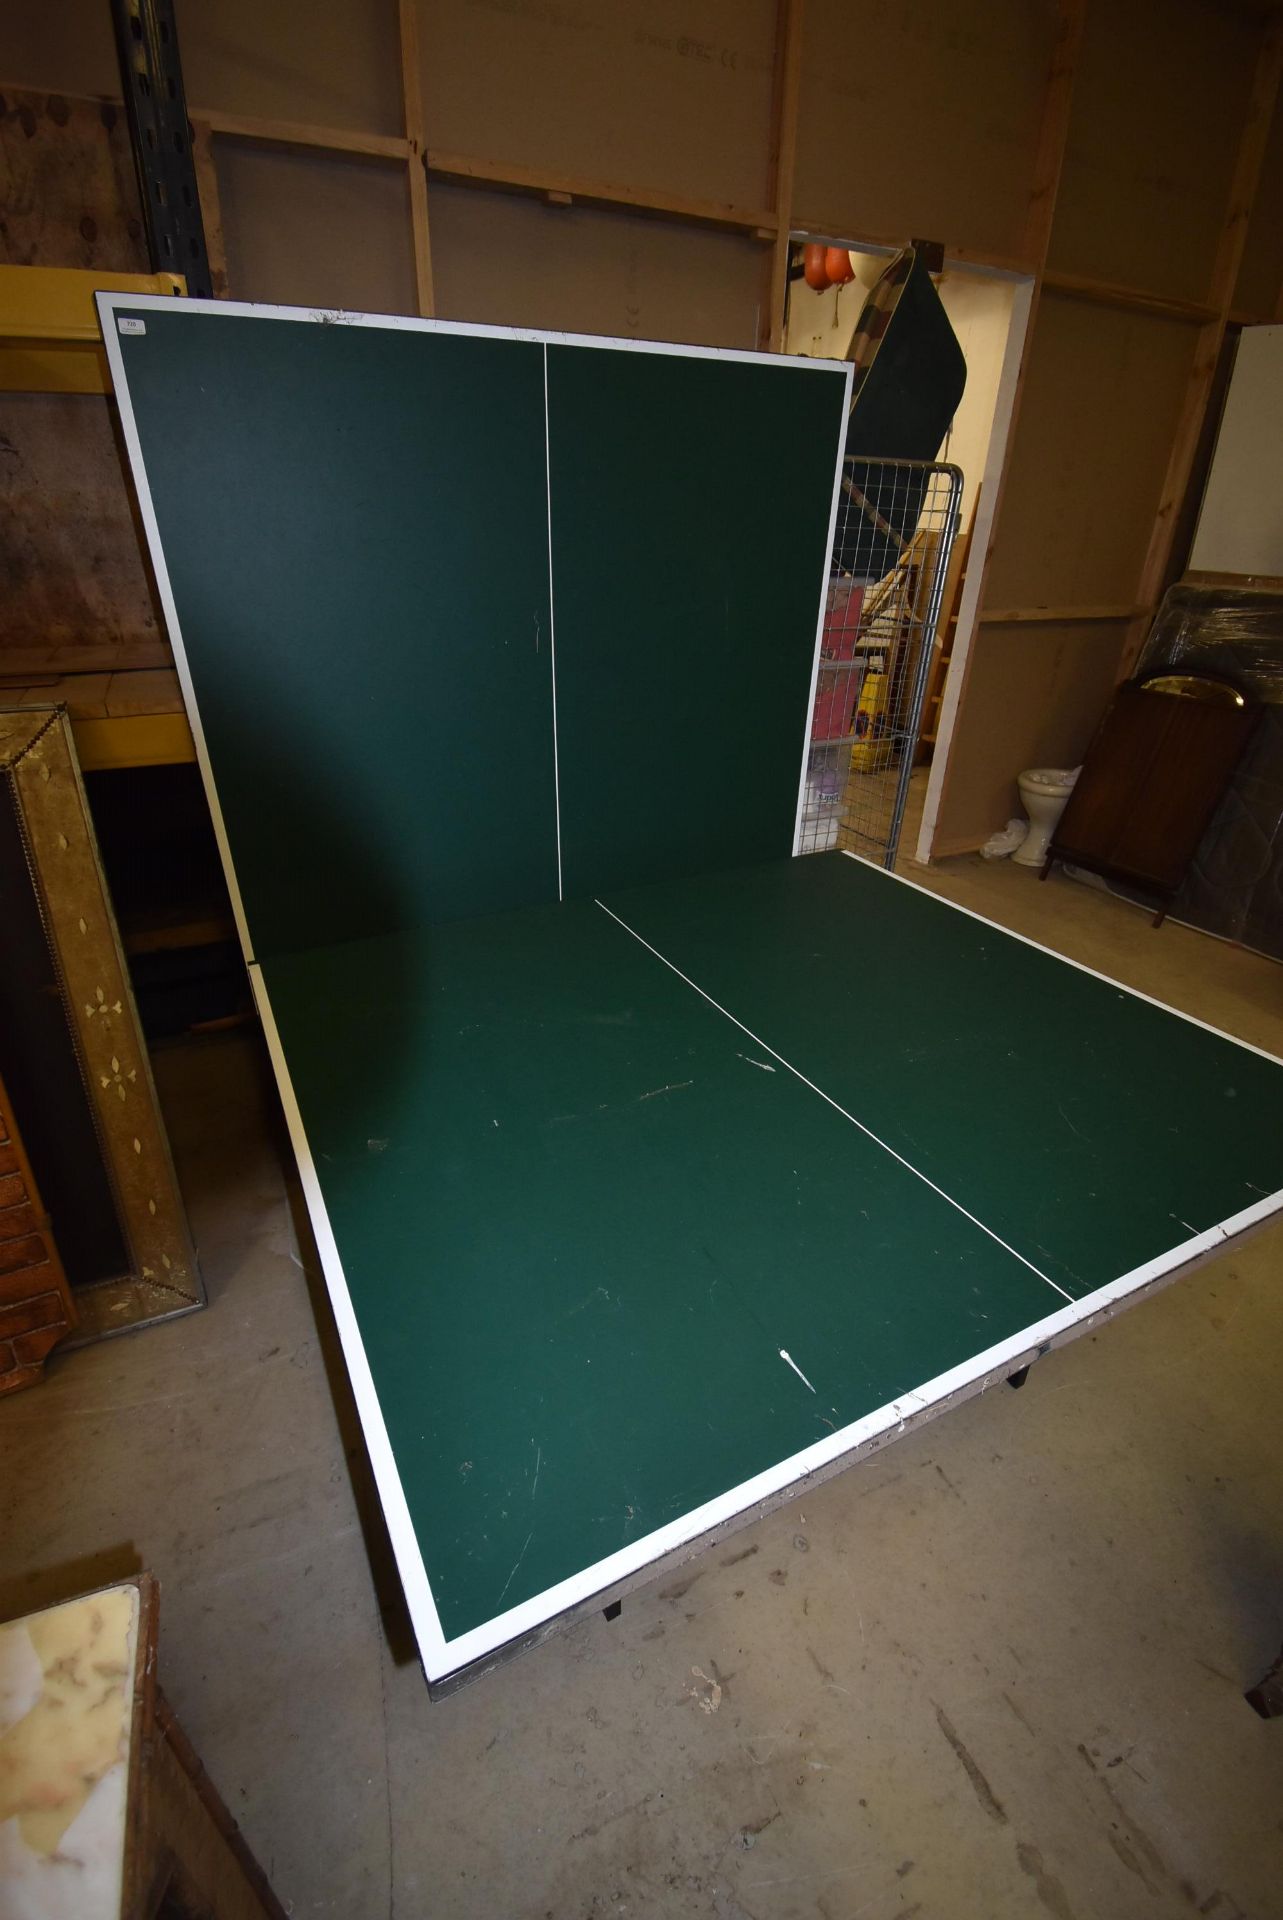 *Butterfly Table Tennis Table